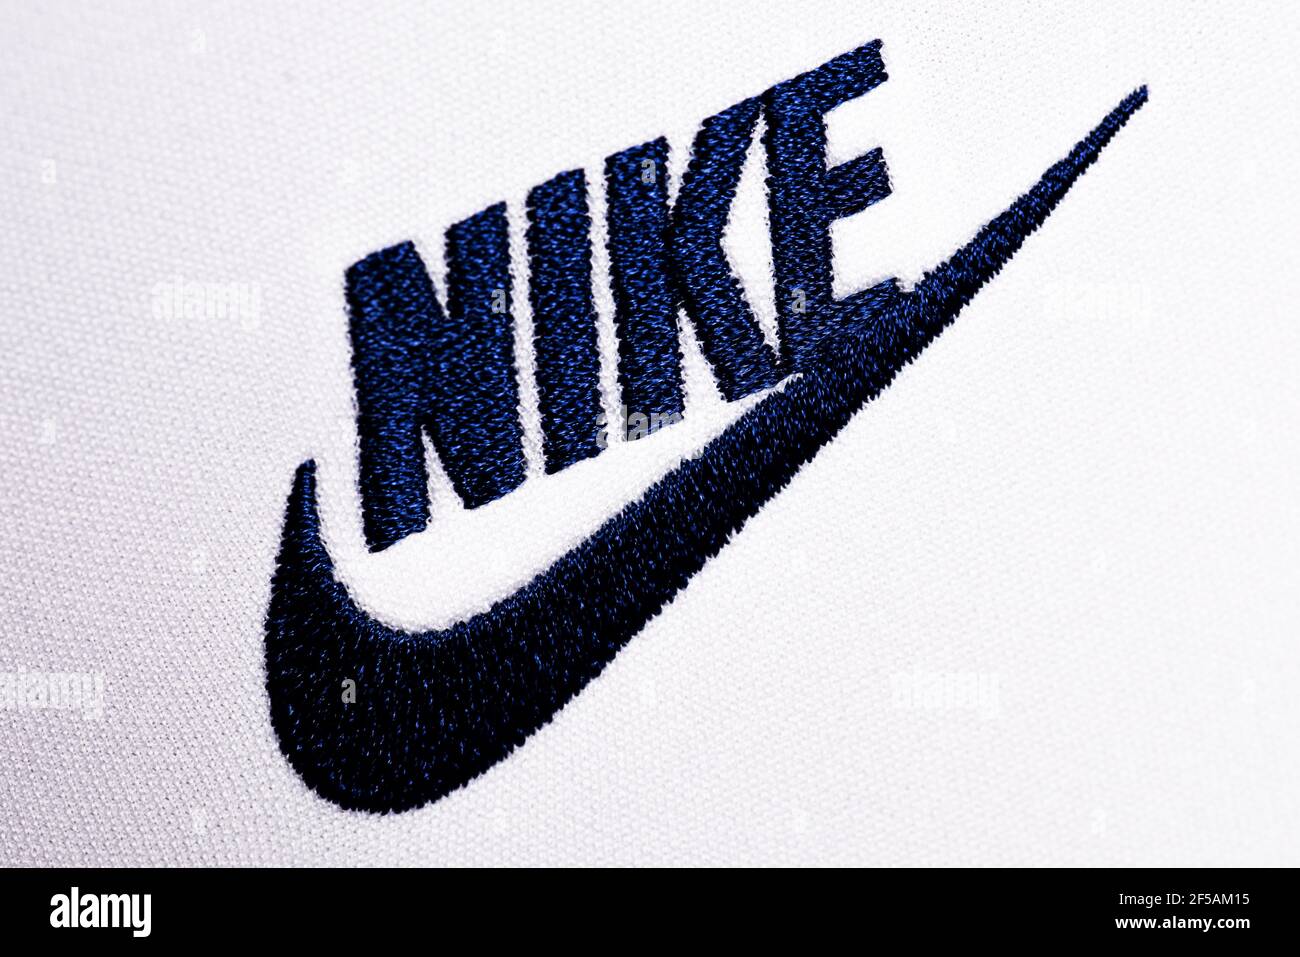 Nike Swoosh Logo High Resolution Stock Photography and Images - Alamy